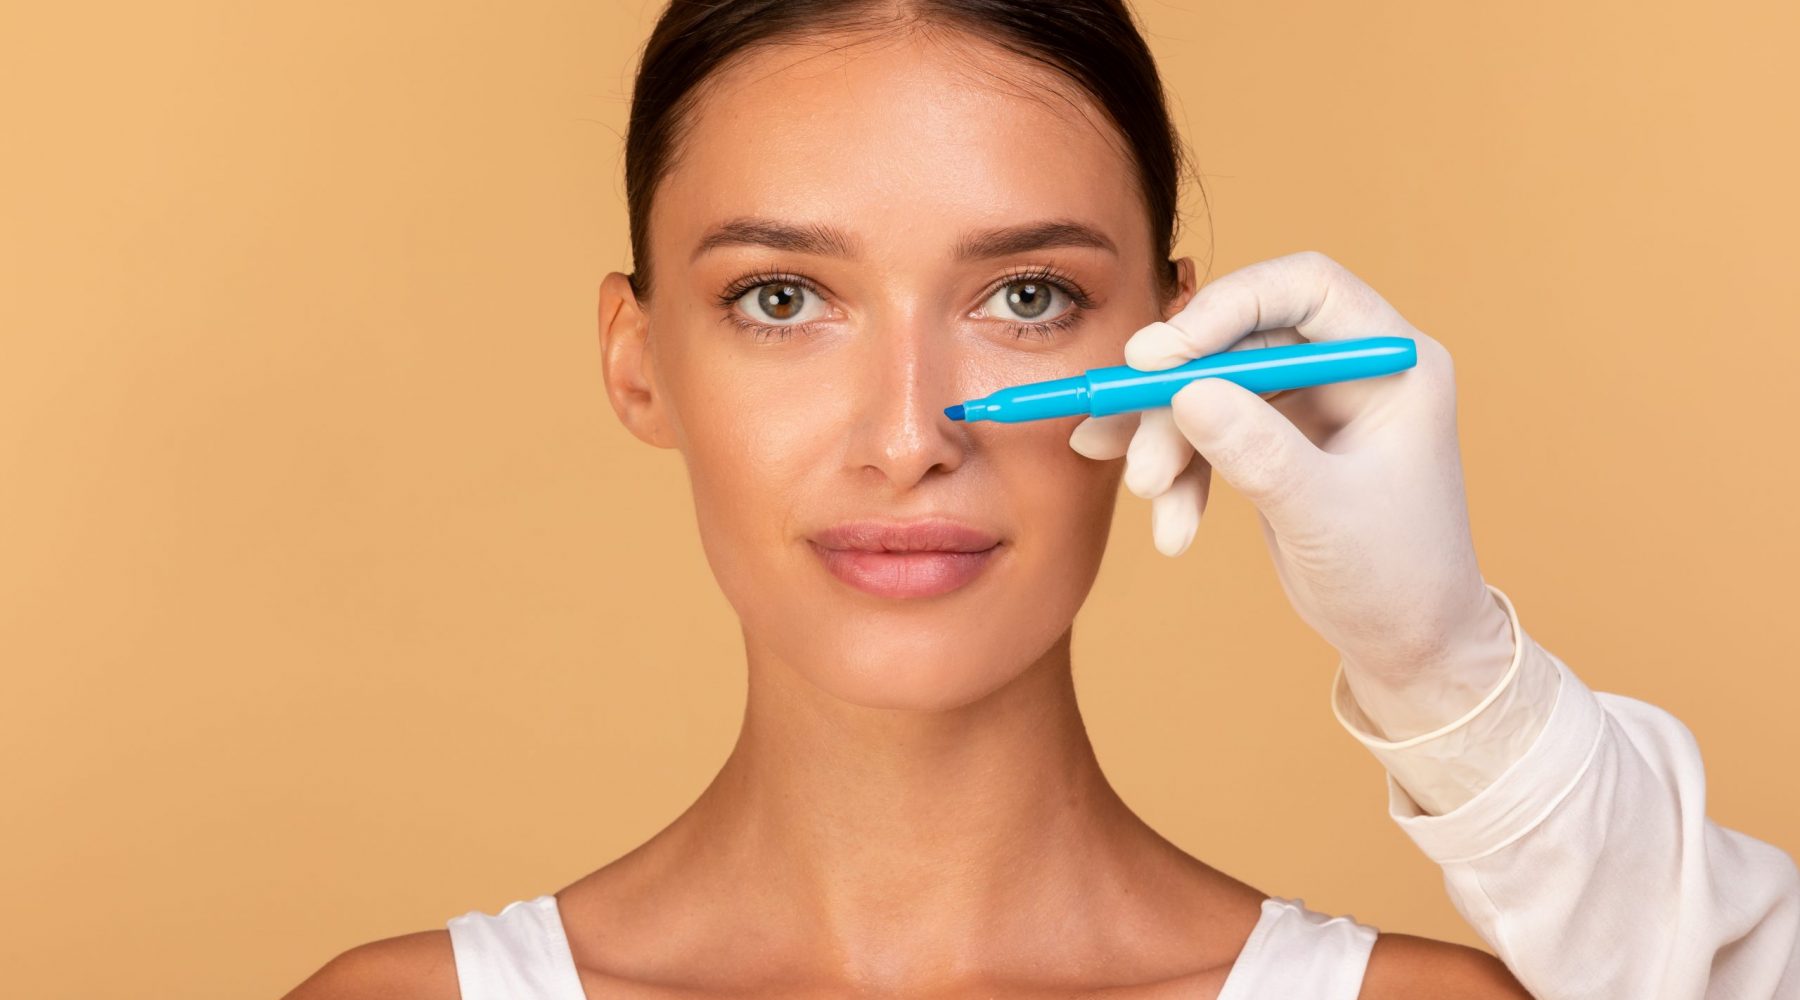 Rhinoplasty concept. Doctor making marks on patient's face, young caucasian lady on consultation at surgeon, standing on beige background. Facial plastic surgery concept